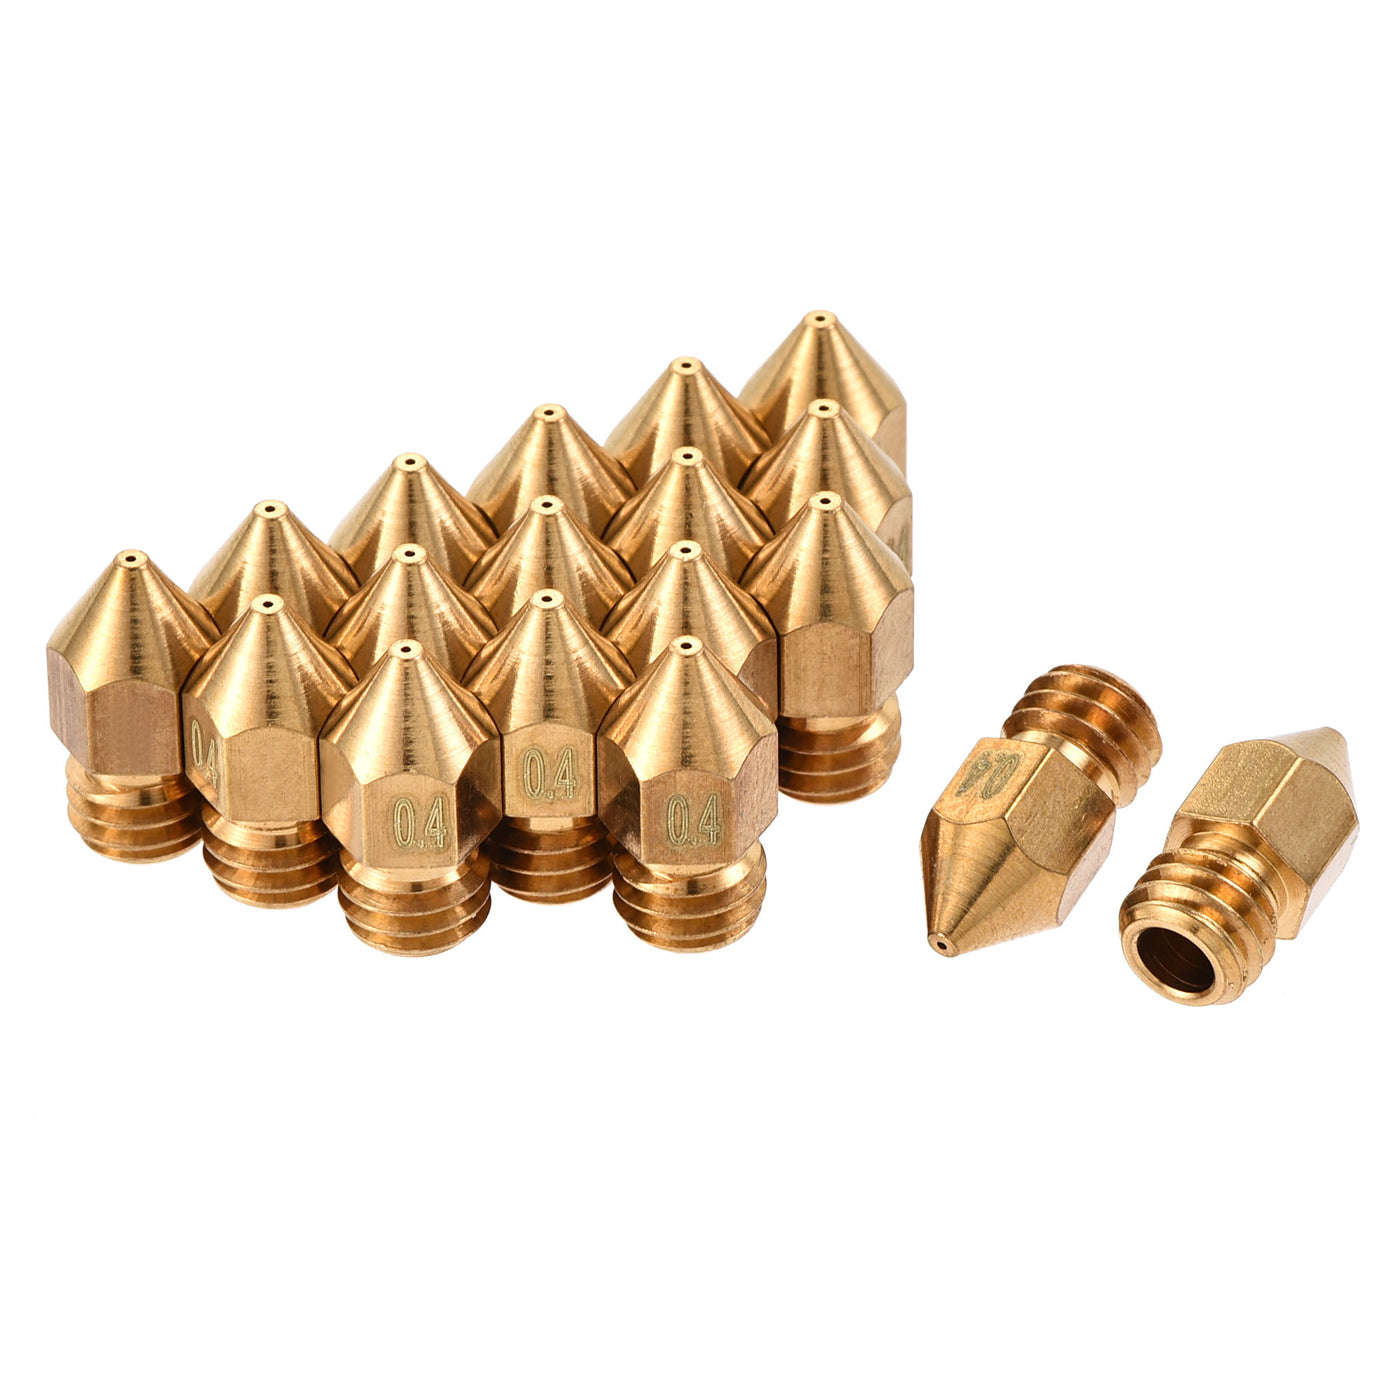 uxcell Uxcell 0.4mm 3D Printer Nozzle, 18pcs M6 Thread for MK8 3mm Extruder Print, Brass